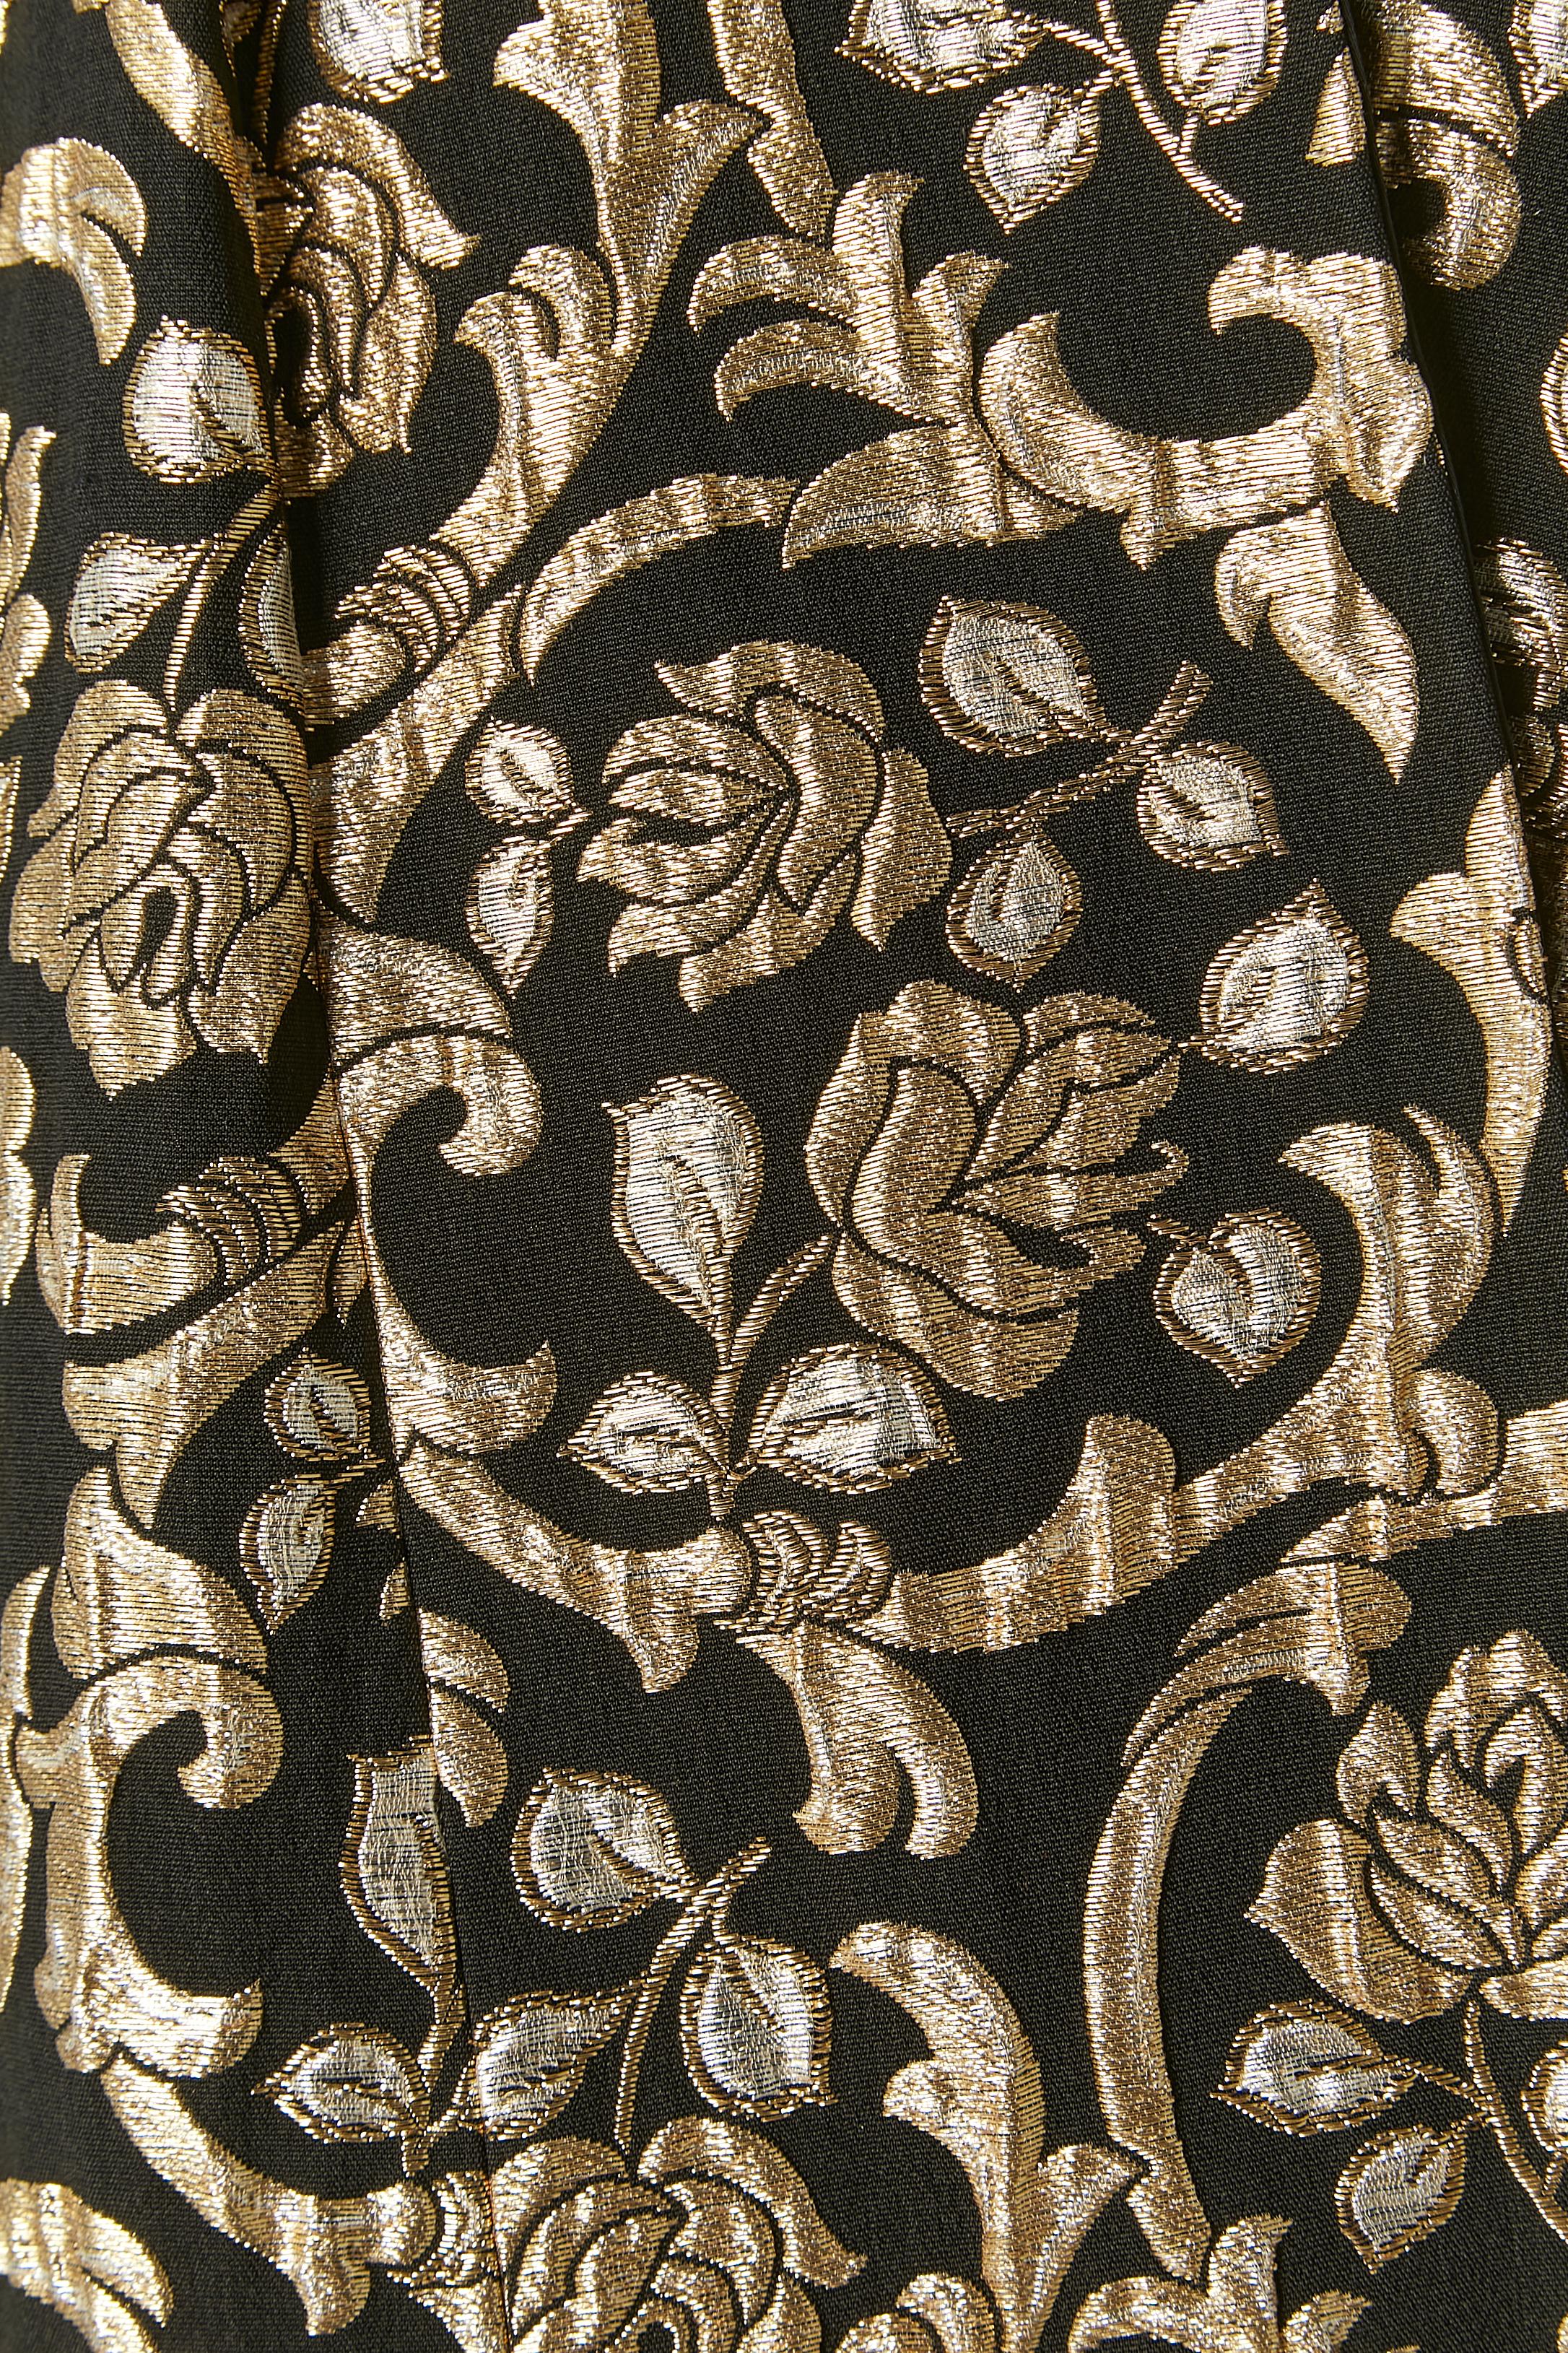 Gold and silver lurex brocade on black background evening coat I.Magnin & Co  In Excellent Condition For Sale In Saint-Ouen-Sur-Seine, FR